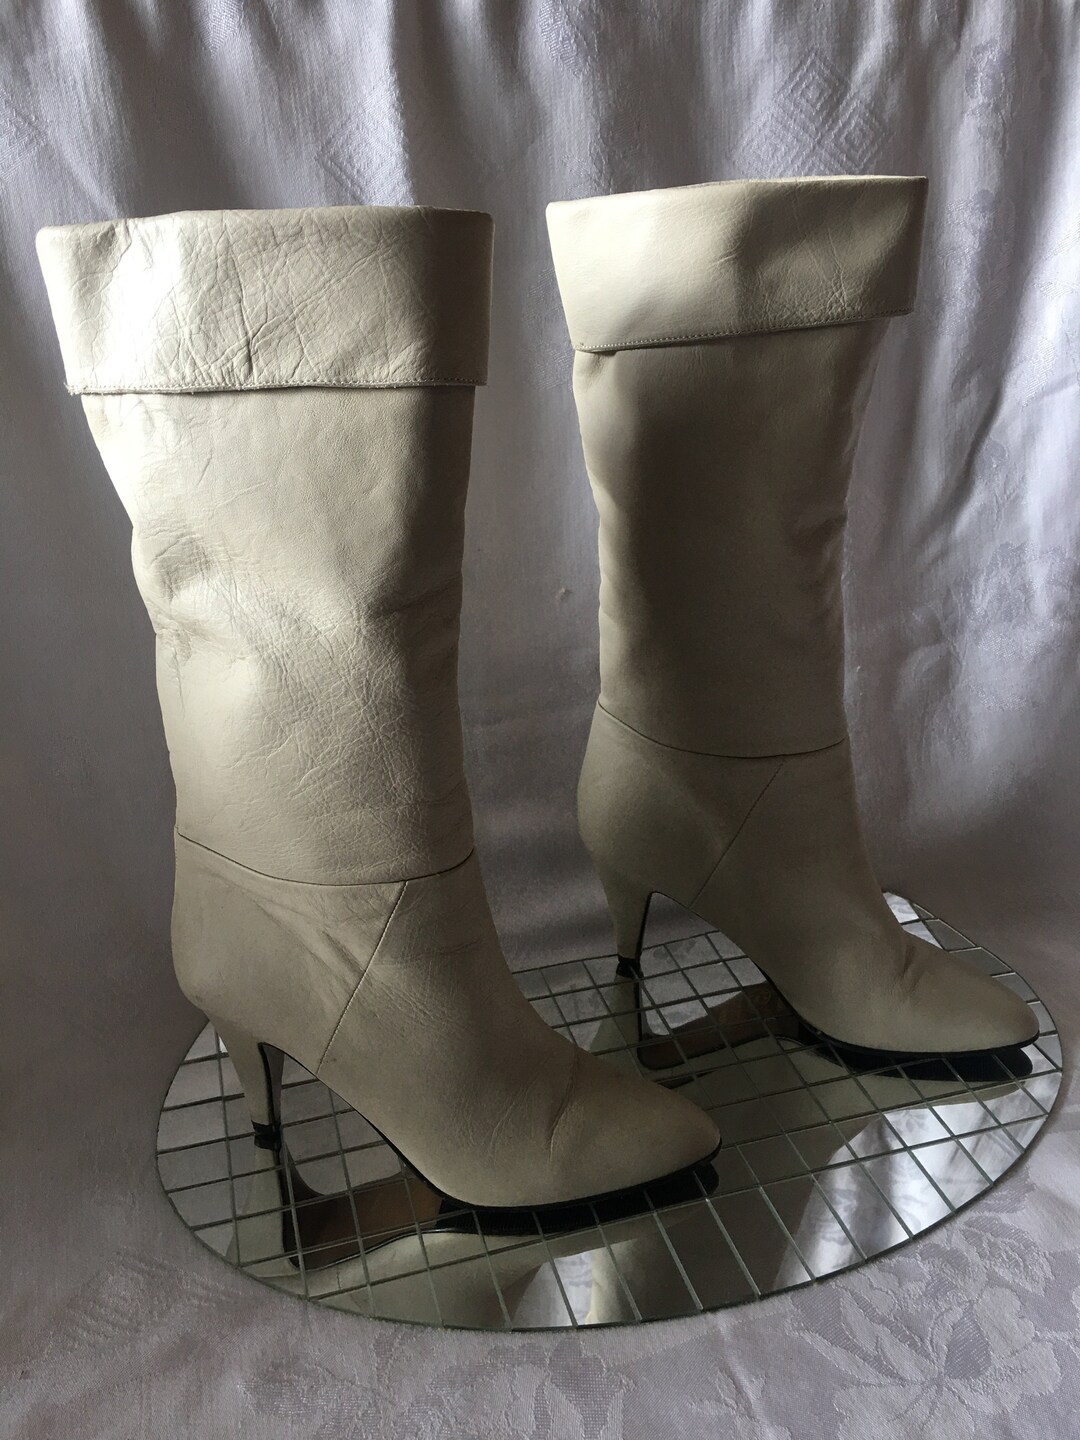 Bare Trap Knee High Boots Made in Italy Size 81/2N - Etsy